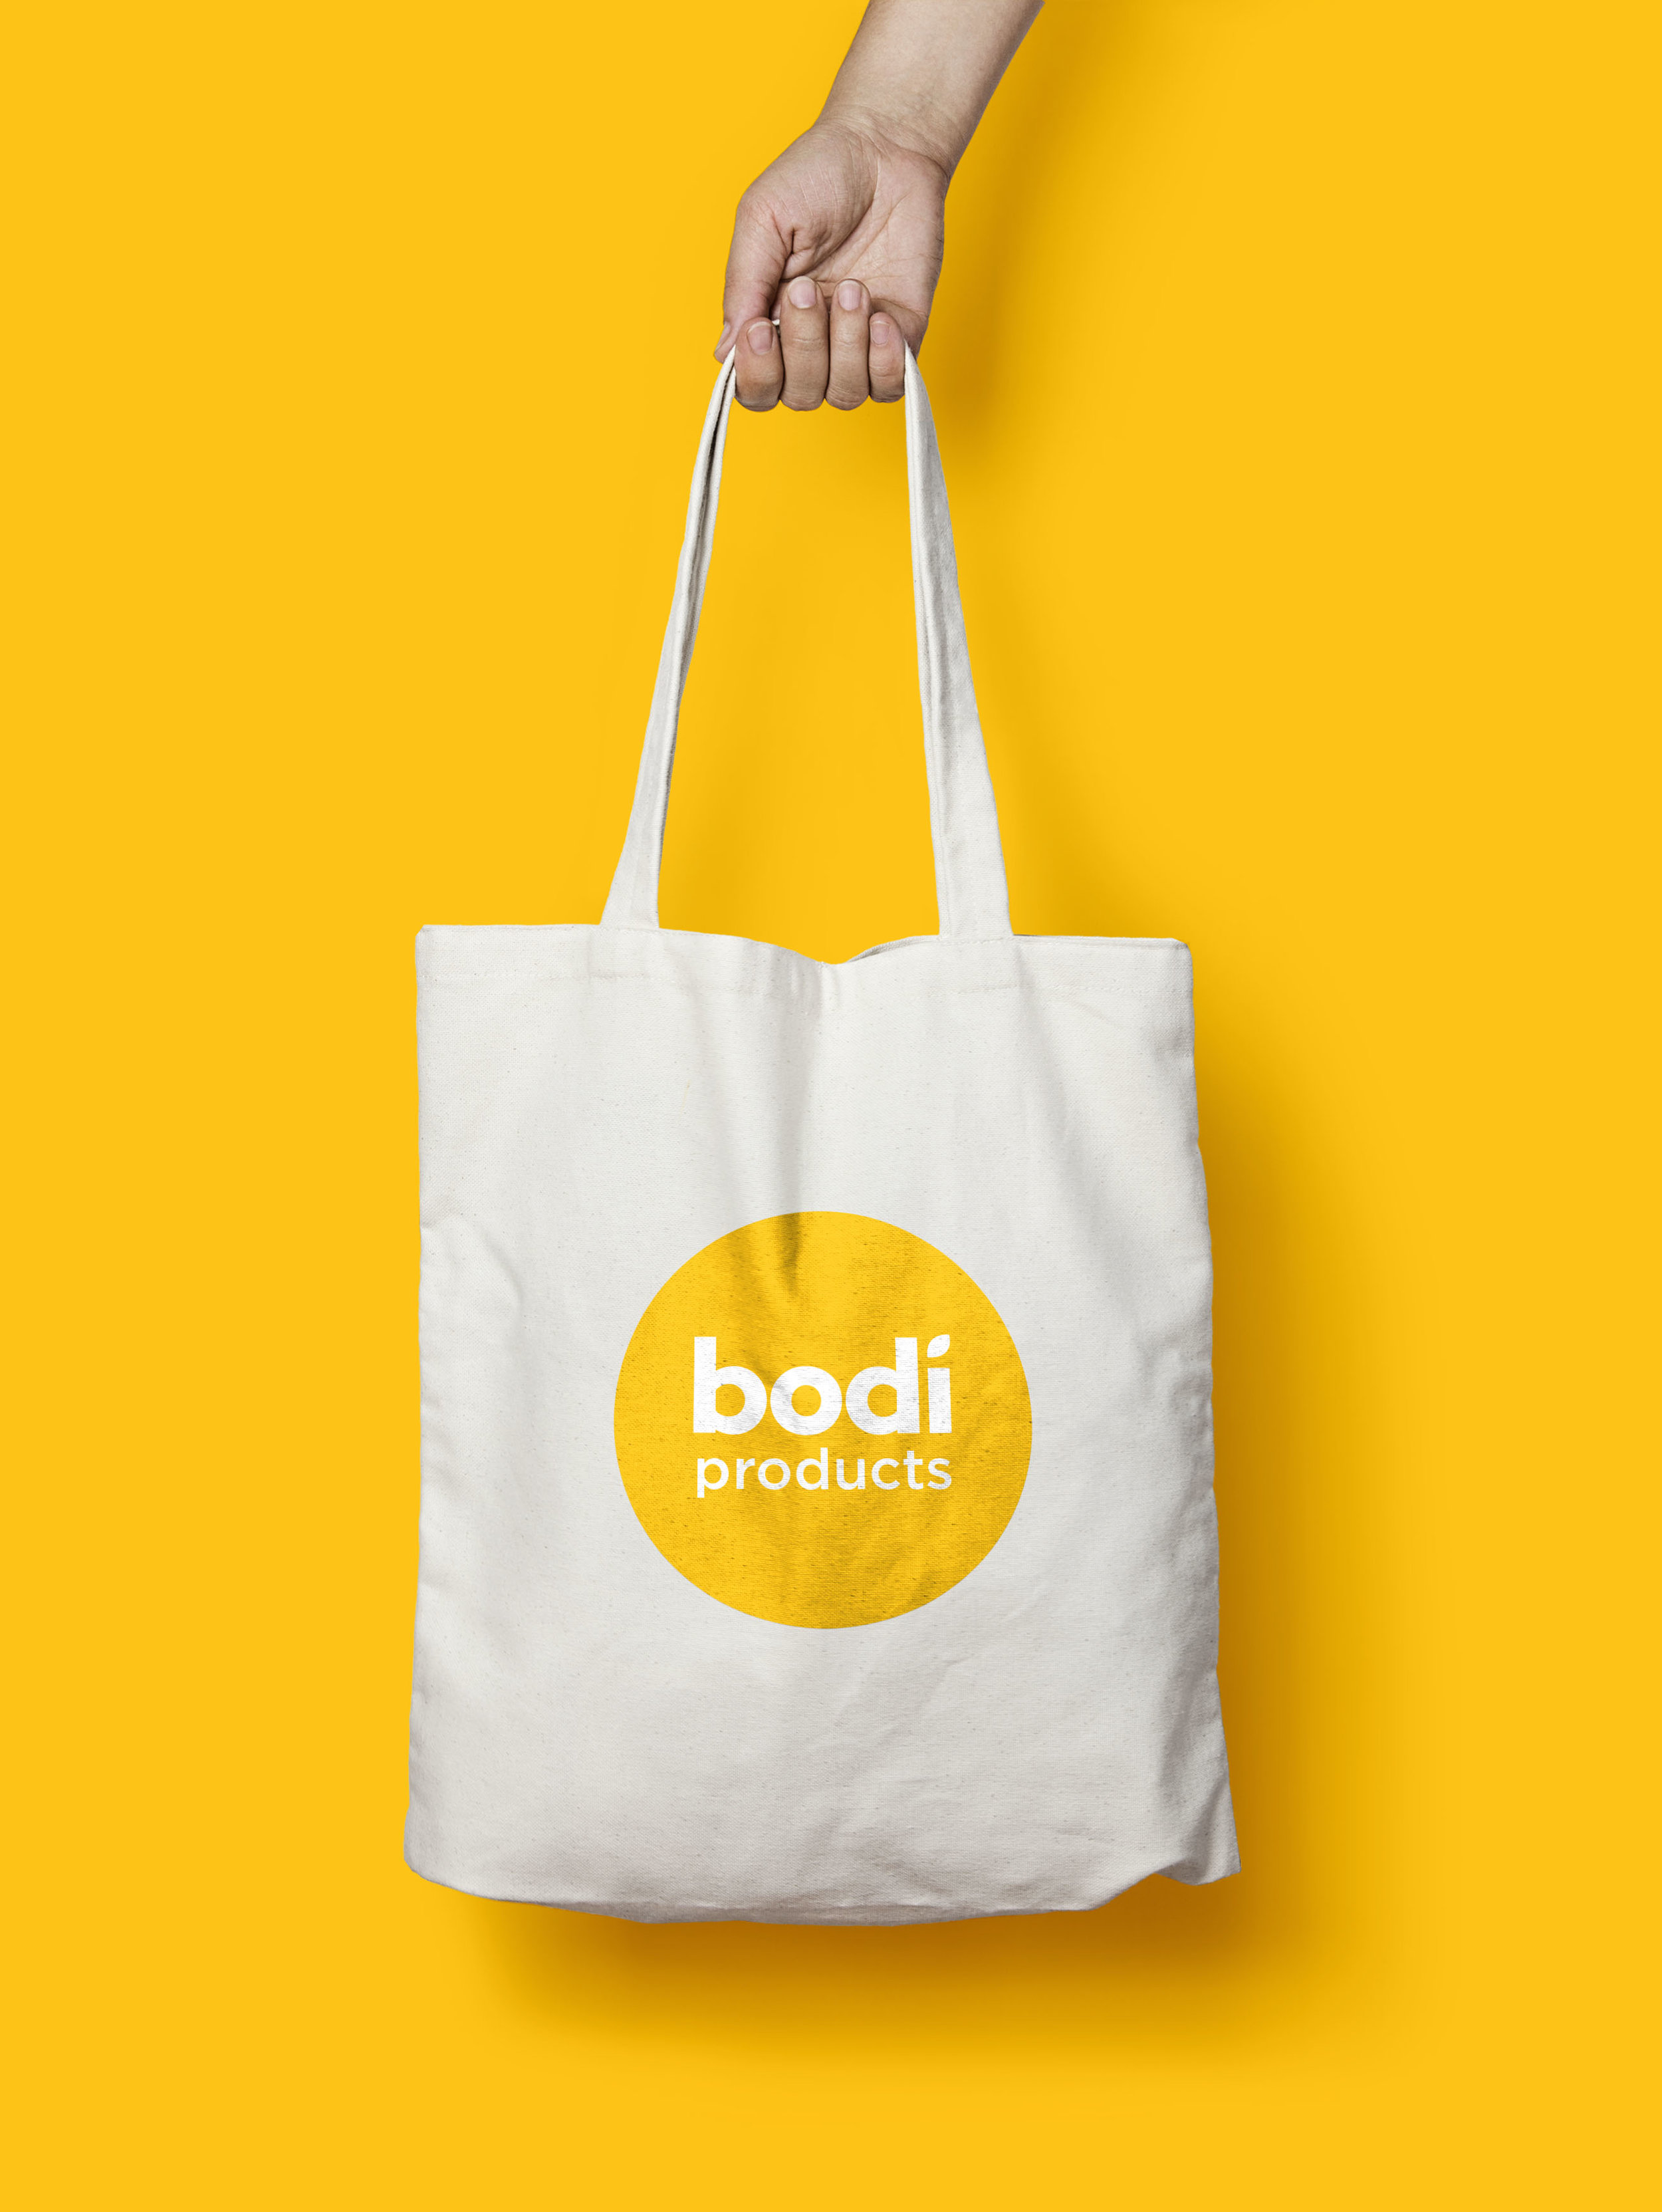 Packaging Designers UK A hand holding a Bodi branded white tote bag in mustard background